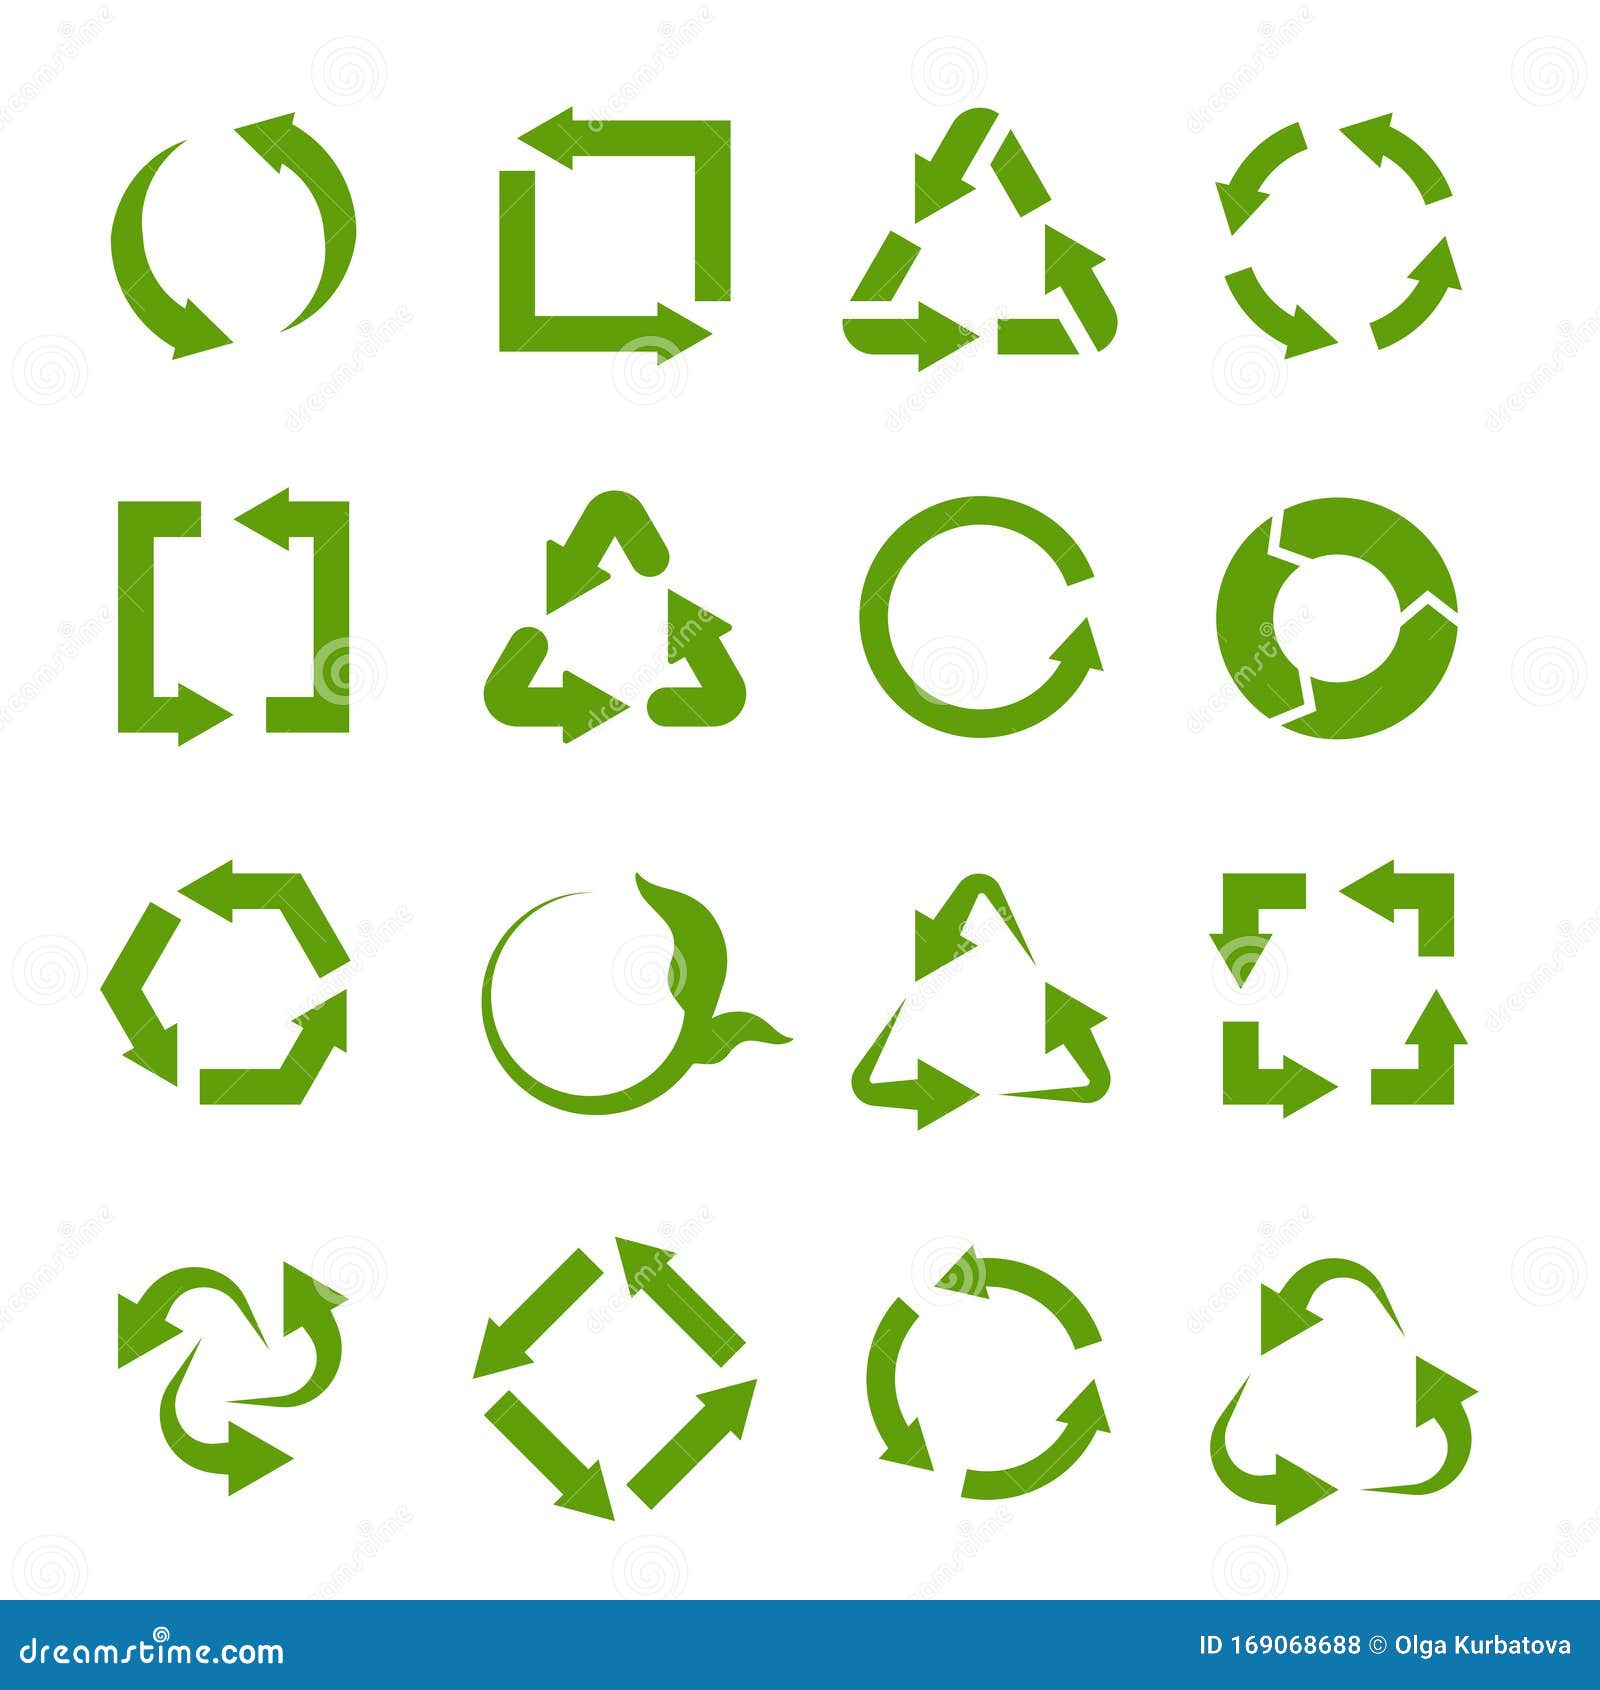 recycling icons. various green circle arrow s. waste reuse recycle, garbage and biodegradable trash, ecology